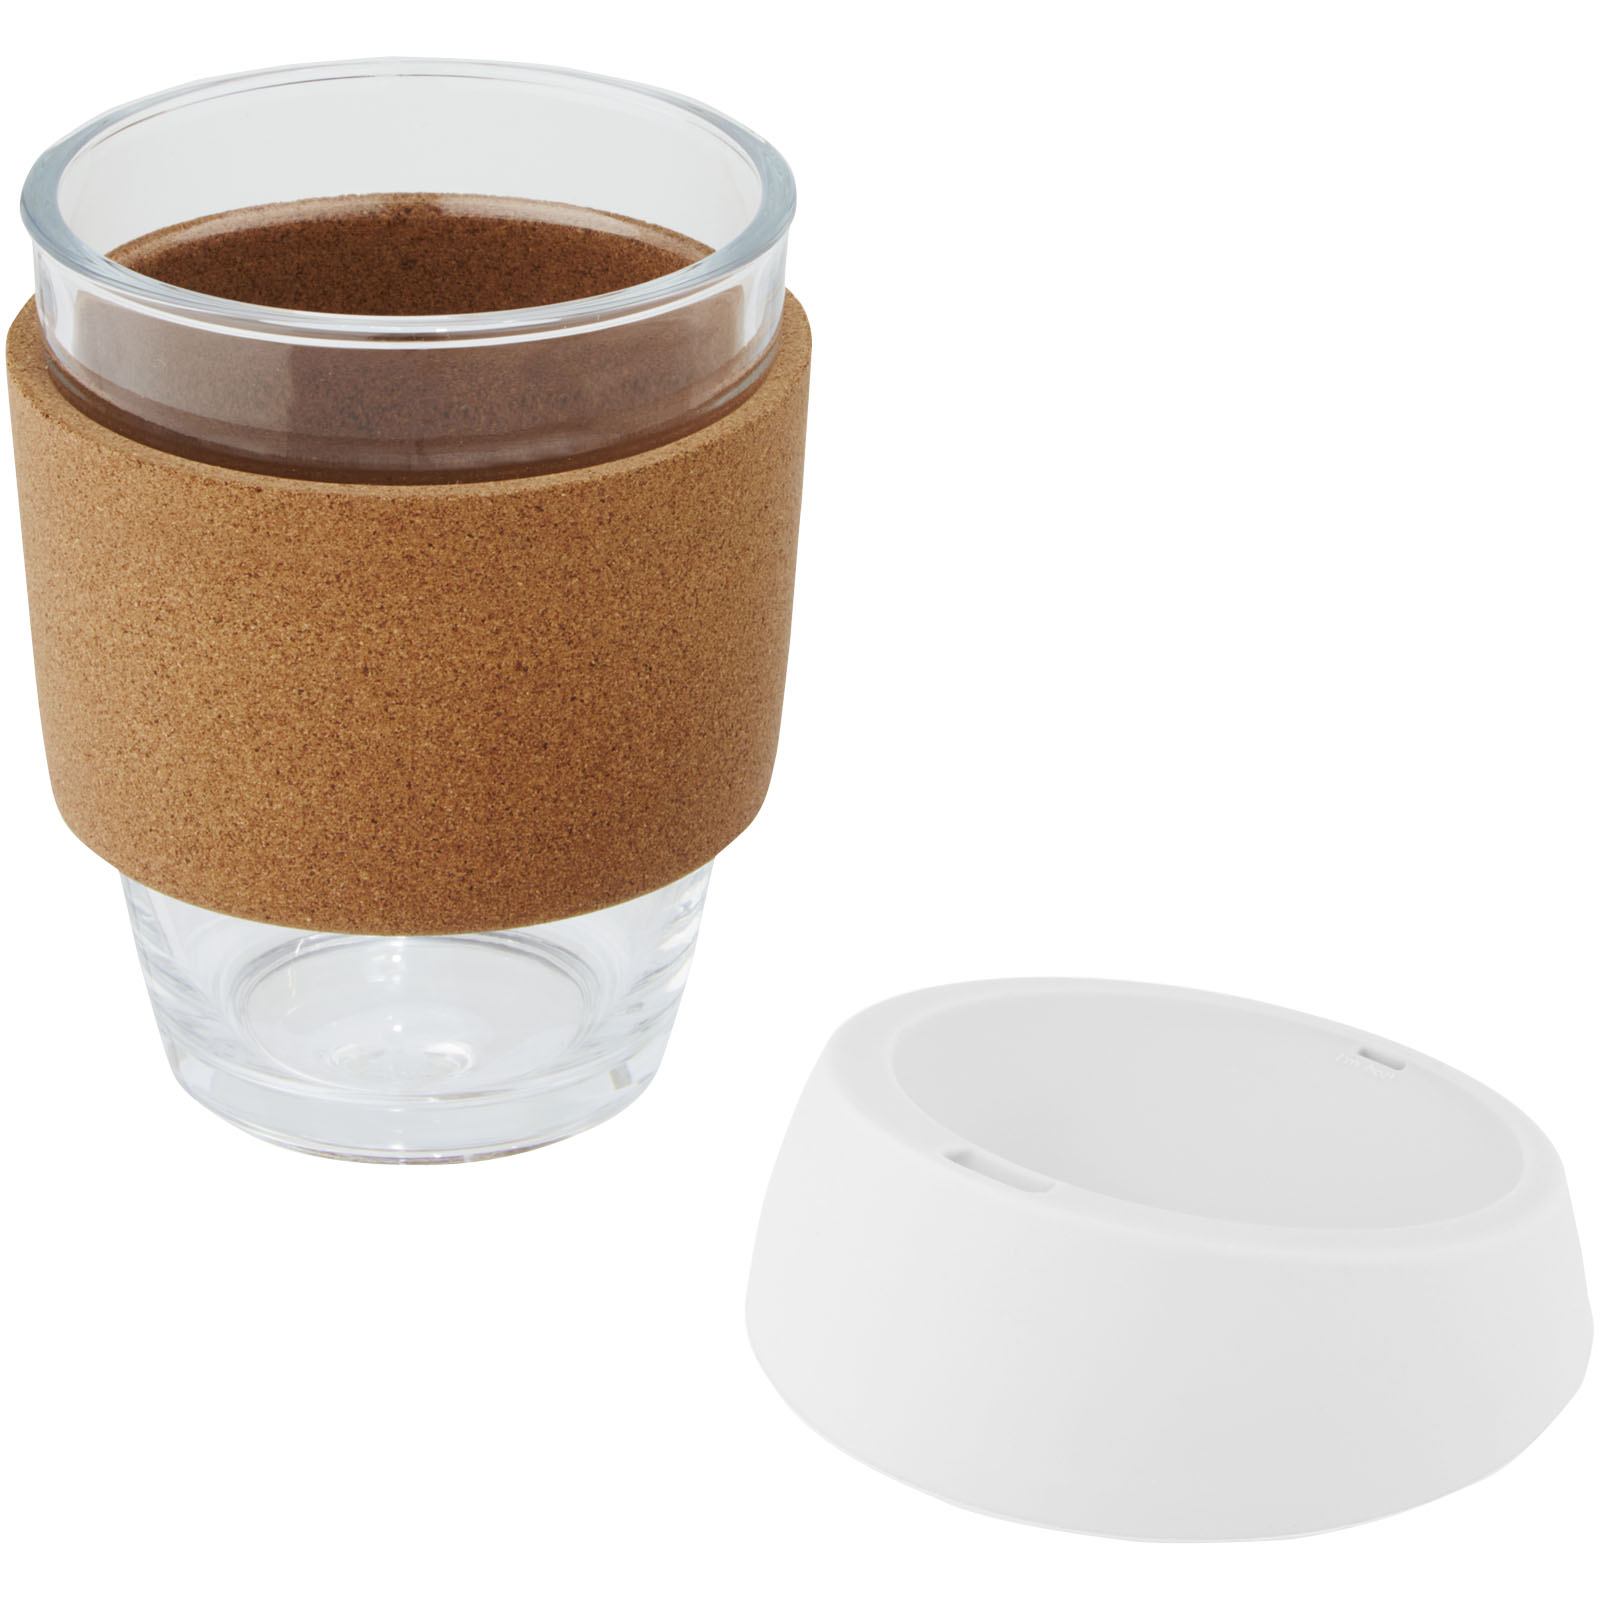 Advertising Travel mugs - Lidan 360 ml borosilicate glass tumbler with cork grip and silicone lid - 4